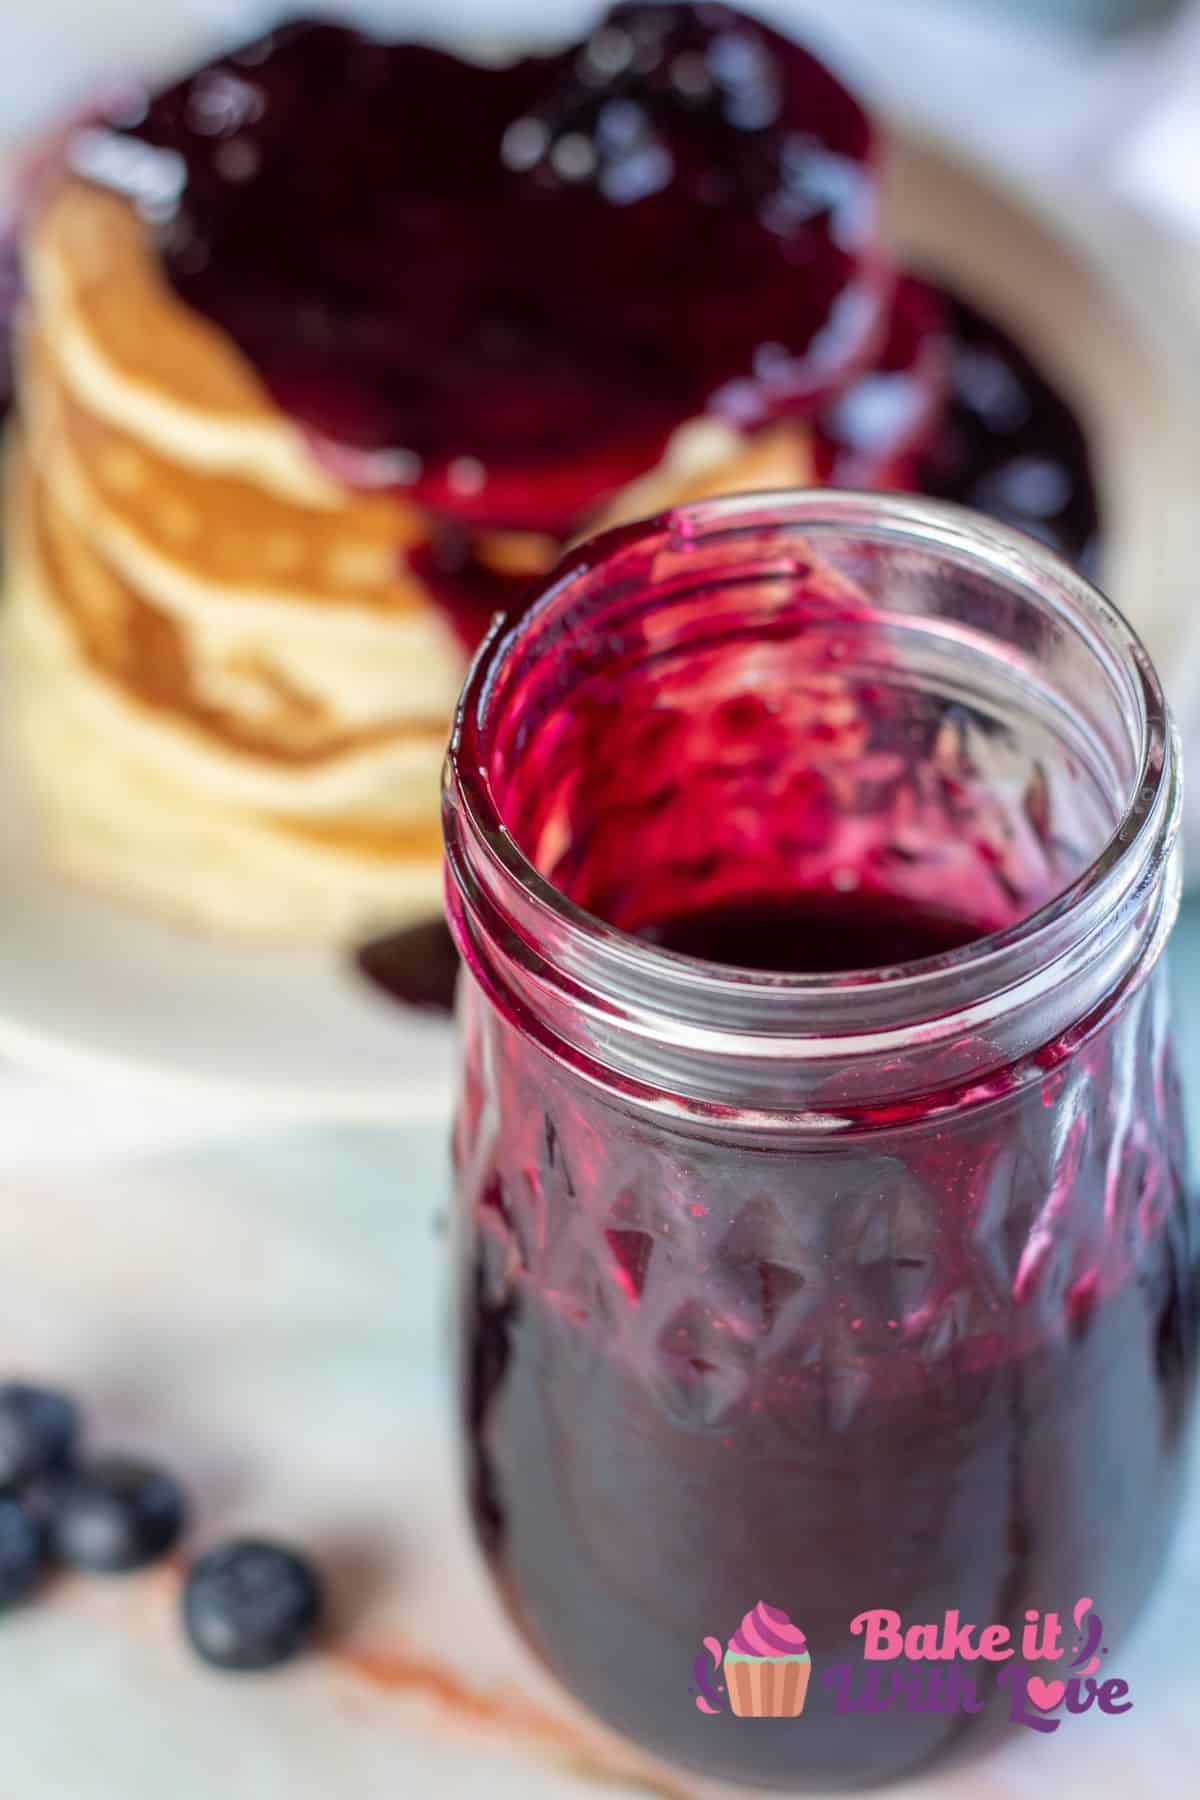 Tall image of blueberry syrup in a jar.